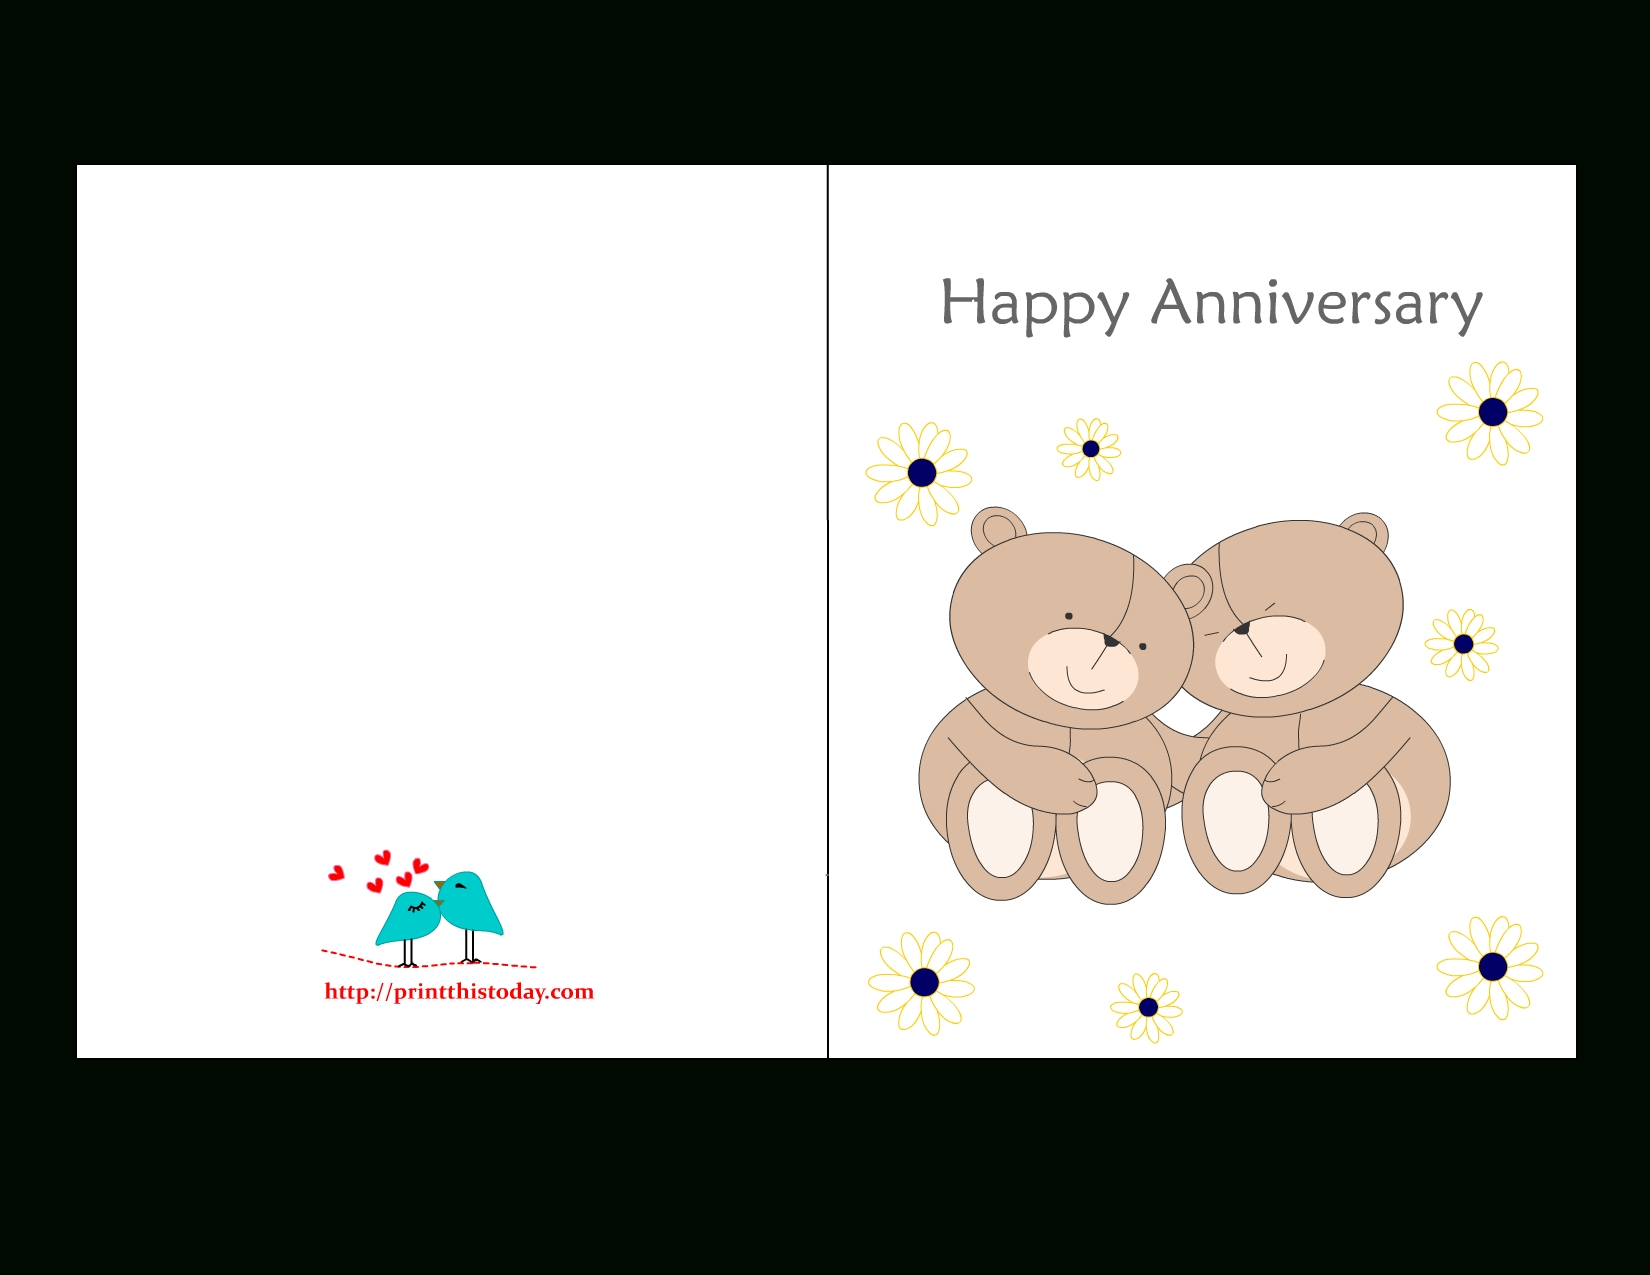 Printable Anniversary Cards For Free | Bestprintable231118 - Printable Cards Free Anniversary